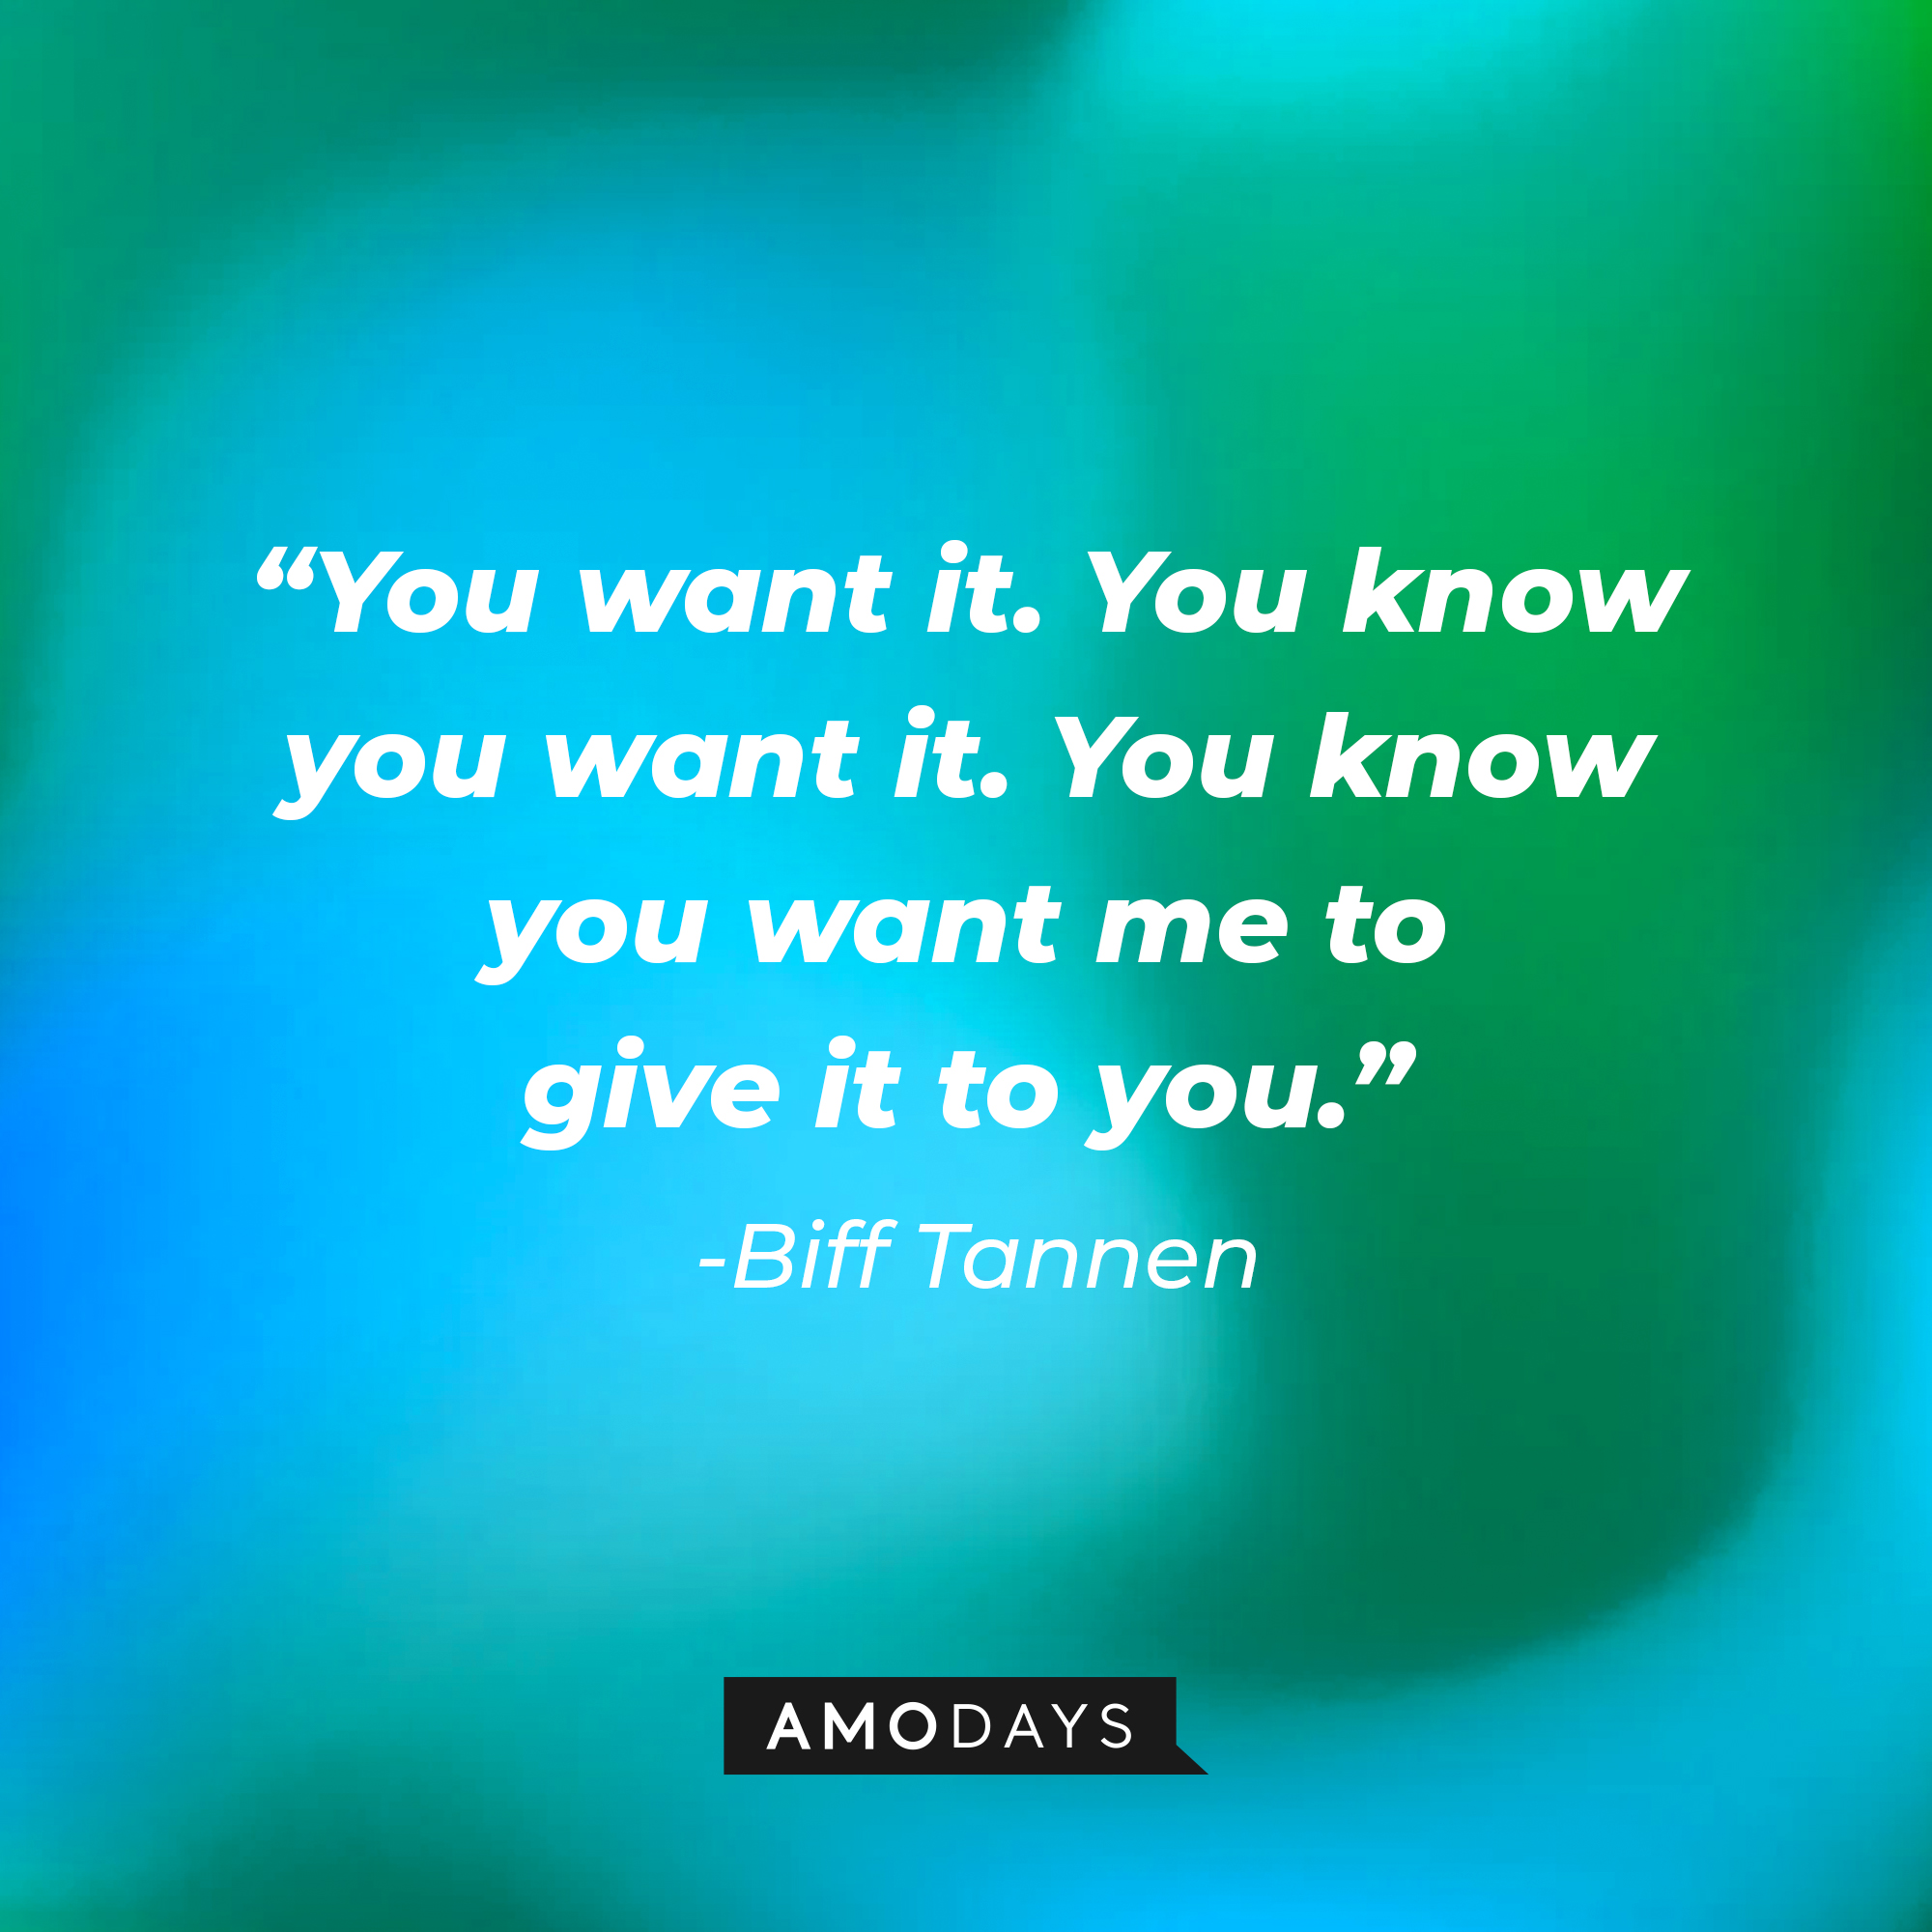 Biff Tannen’s quote: “You want it. You know you want it. You know you want me to give it to you.” | Source: AmoDays